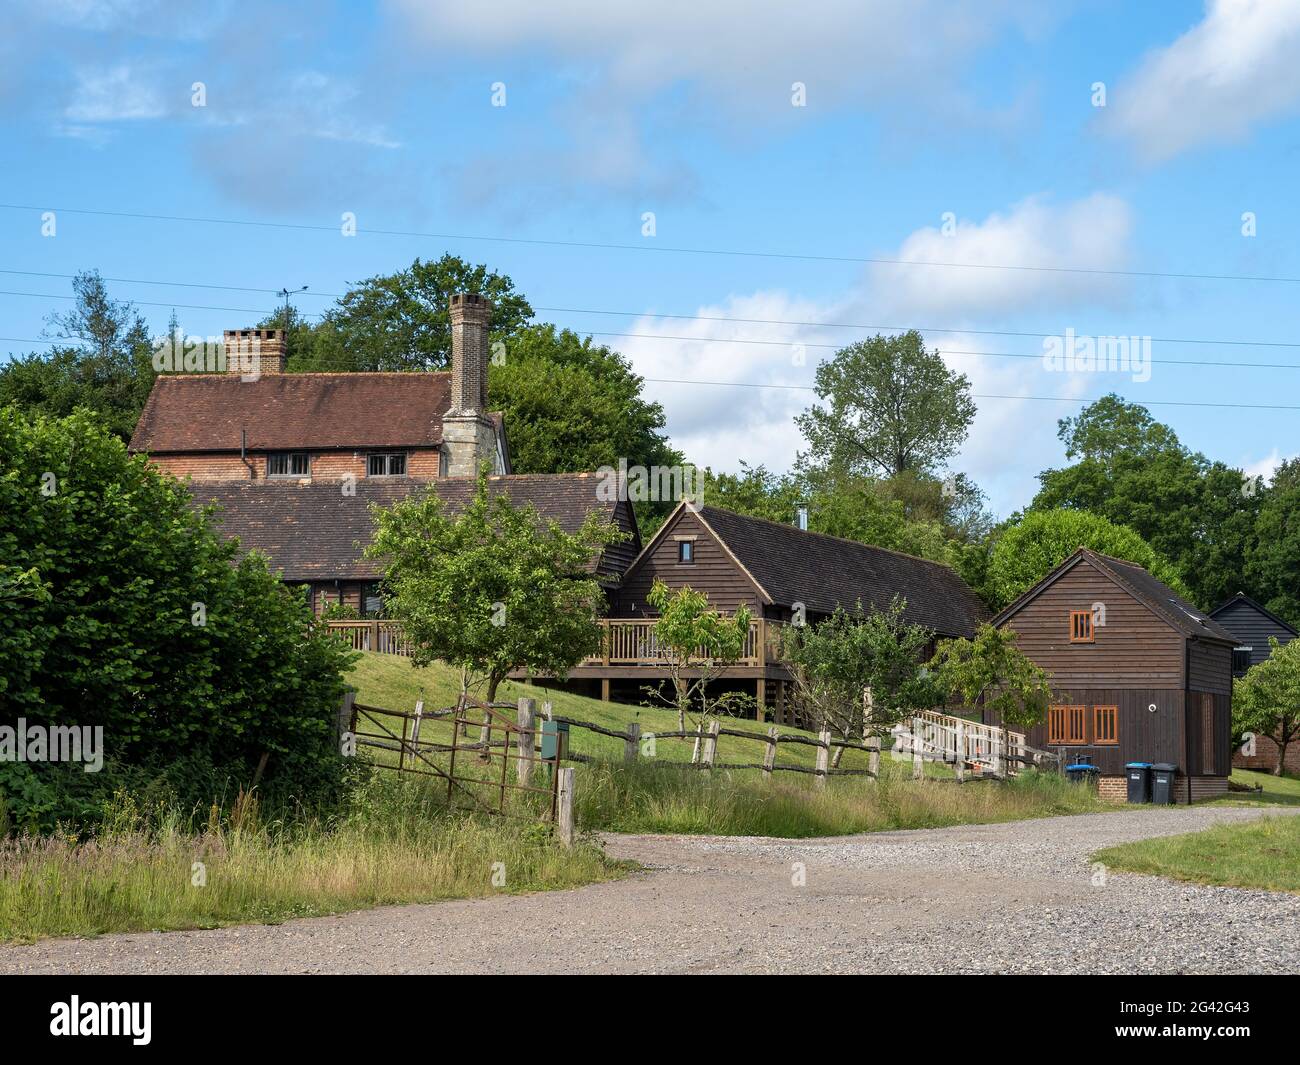 KINGSCOTE, WEST SUSSEX/UK - JUNE 13 : Buildings at the Vineyard in Kingscote, West Sussex on June 13, 2020 Stock Photo